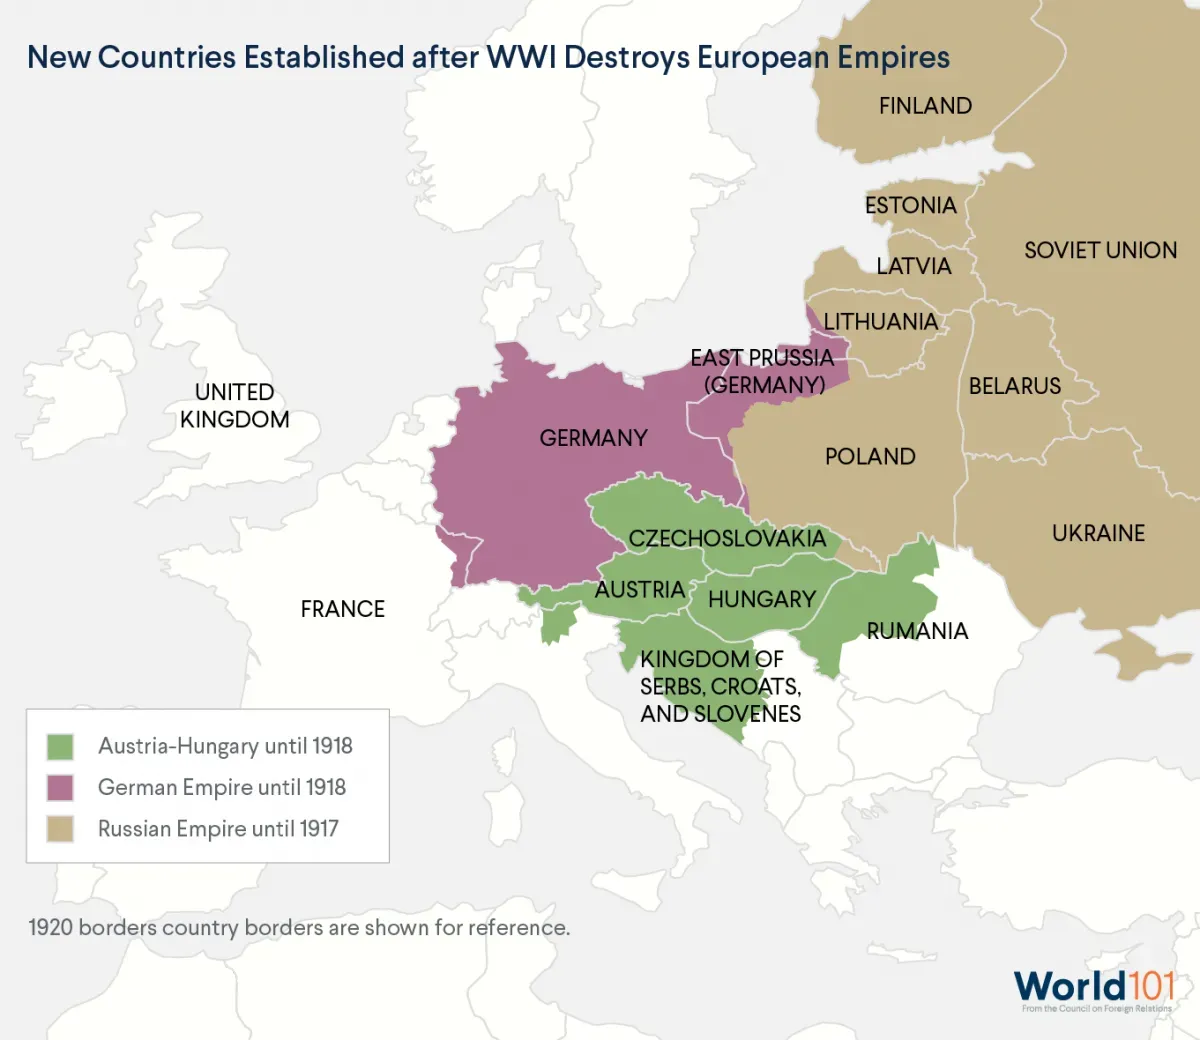 Map of new European countries that were established after World War One destroyed the Russian, German, and Austro-Hungarian empires.